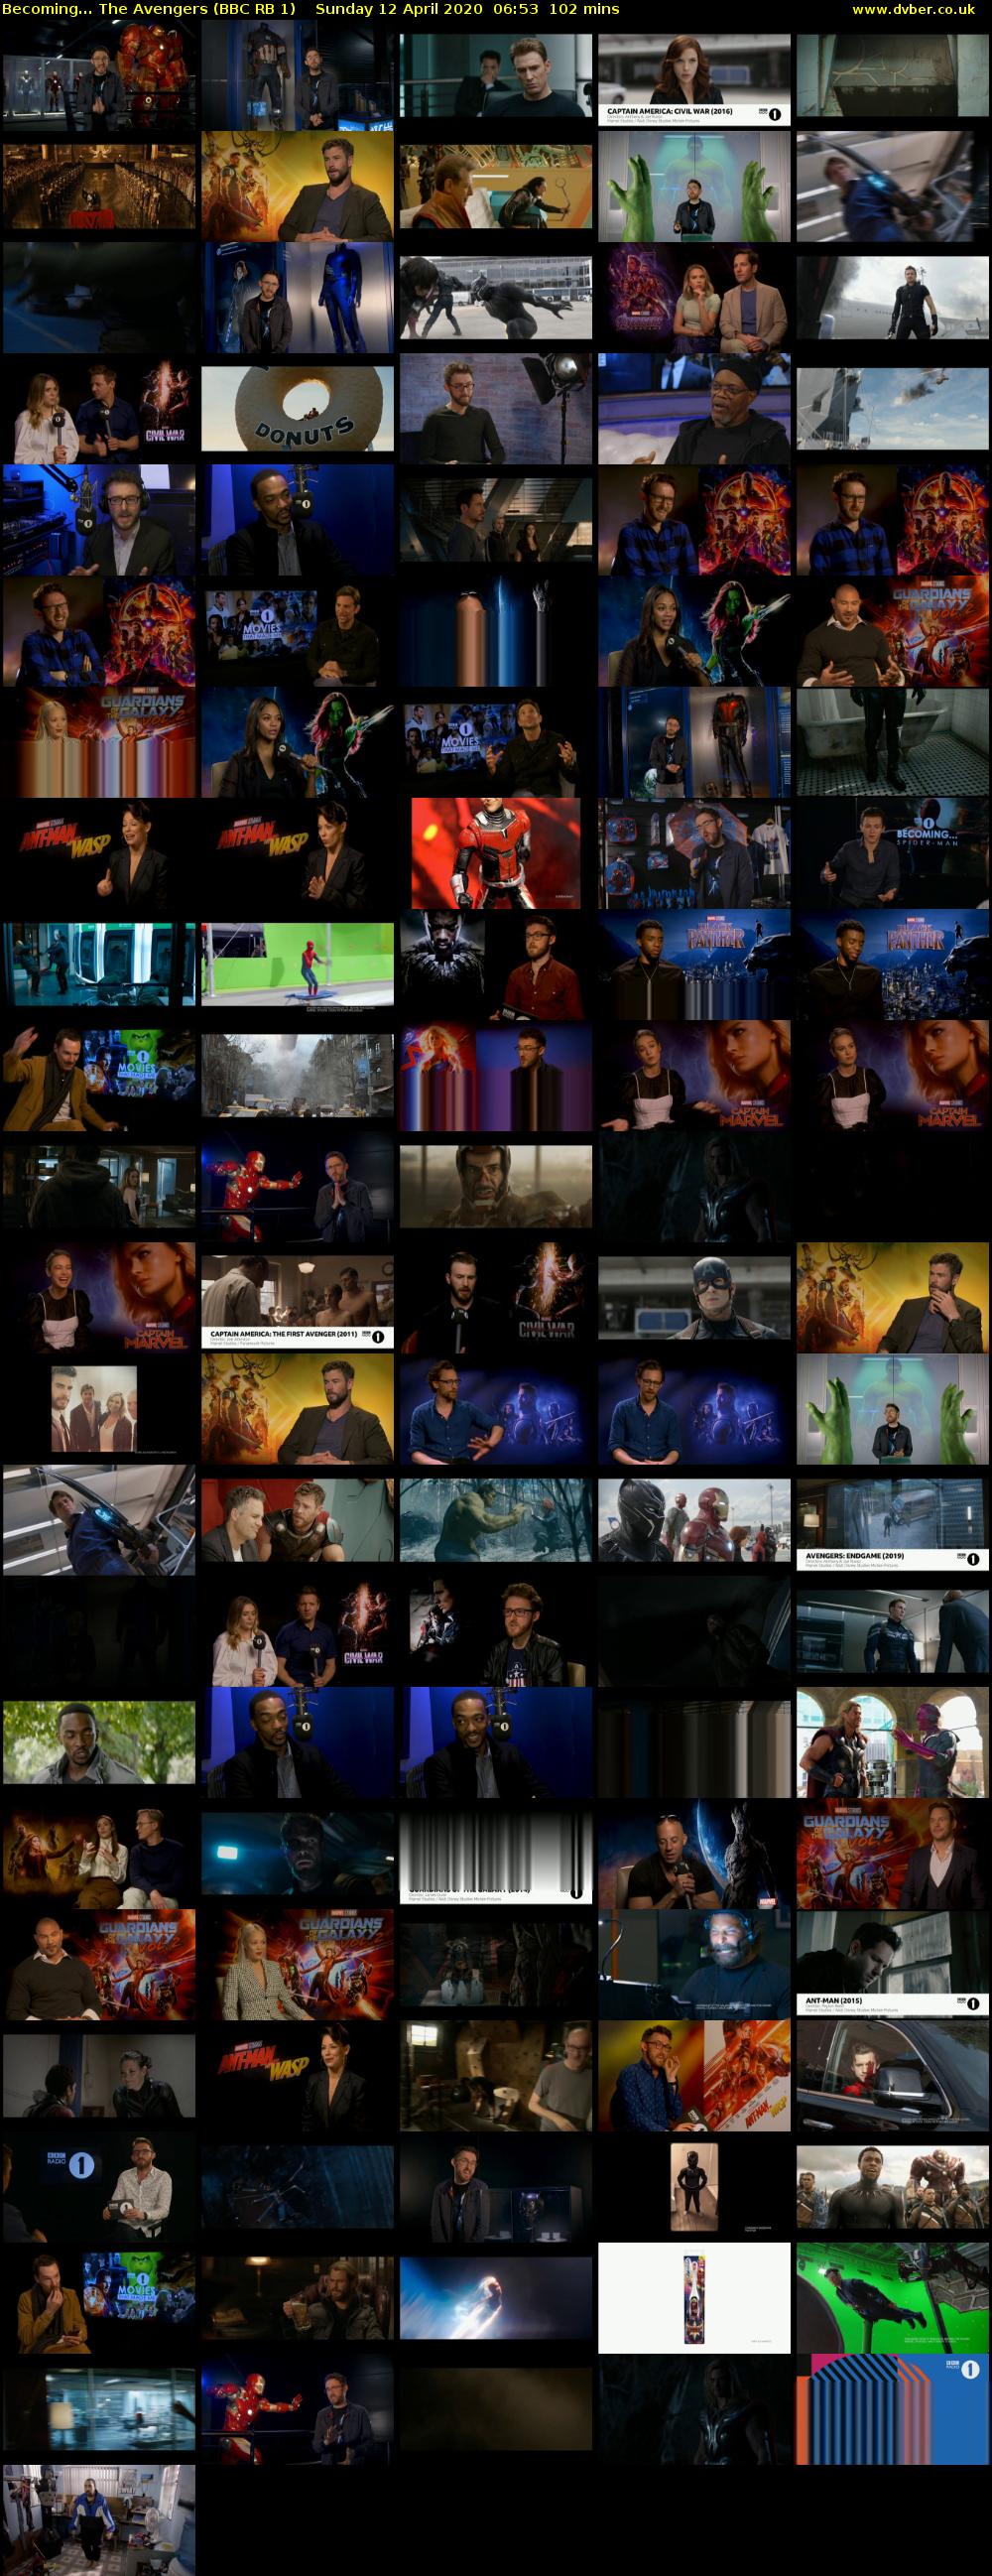 Becoming... The Avengers (BBC RB 1) Sunday 12 April 2020 06:53 - 08:35